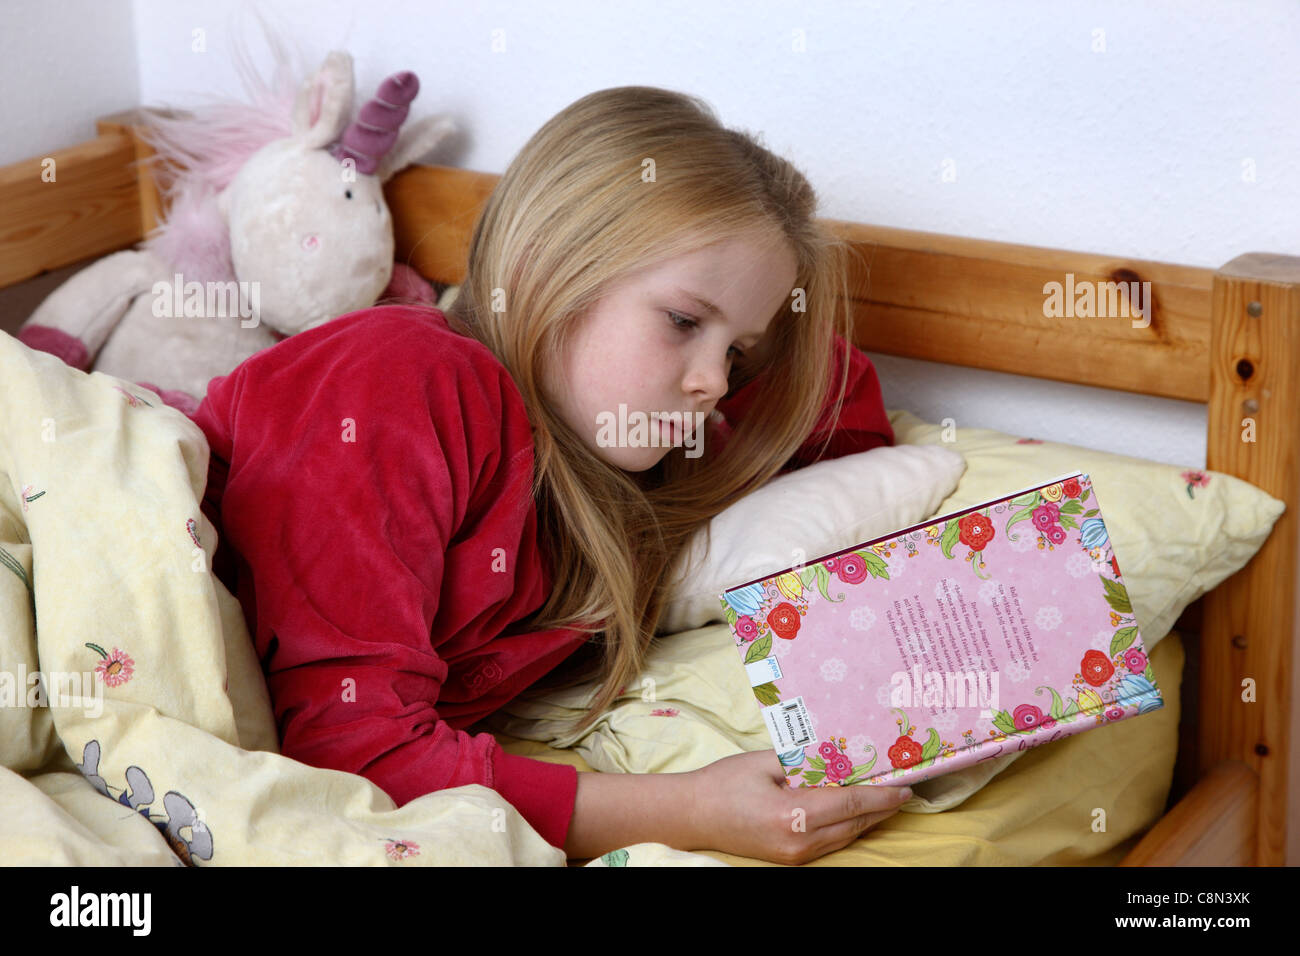 Young girl, 10 years old, reading a book in her bed. Stock Photo